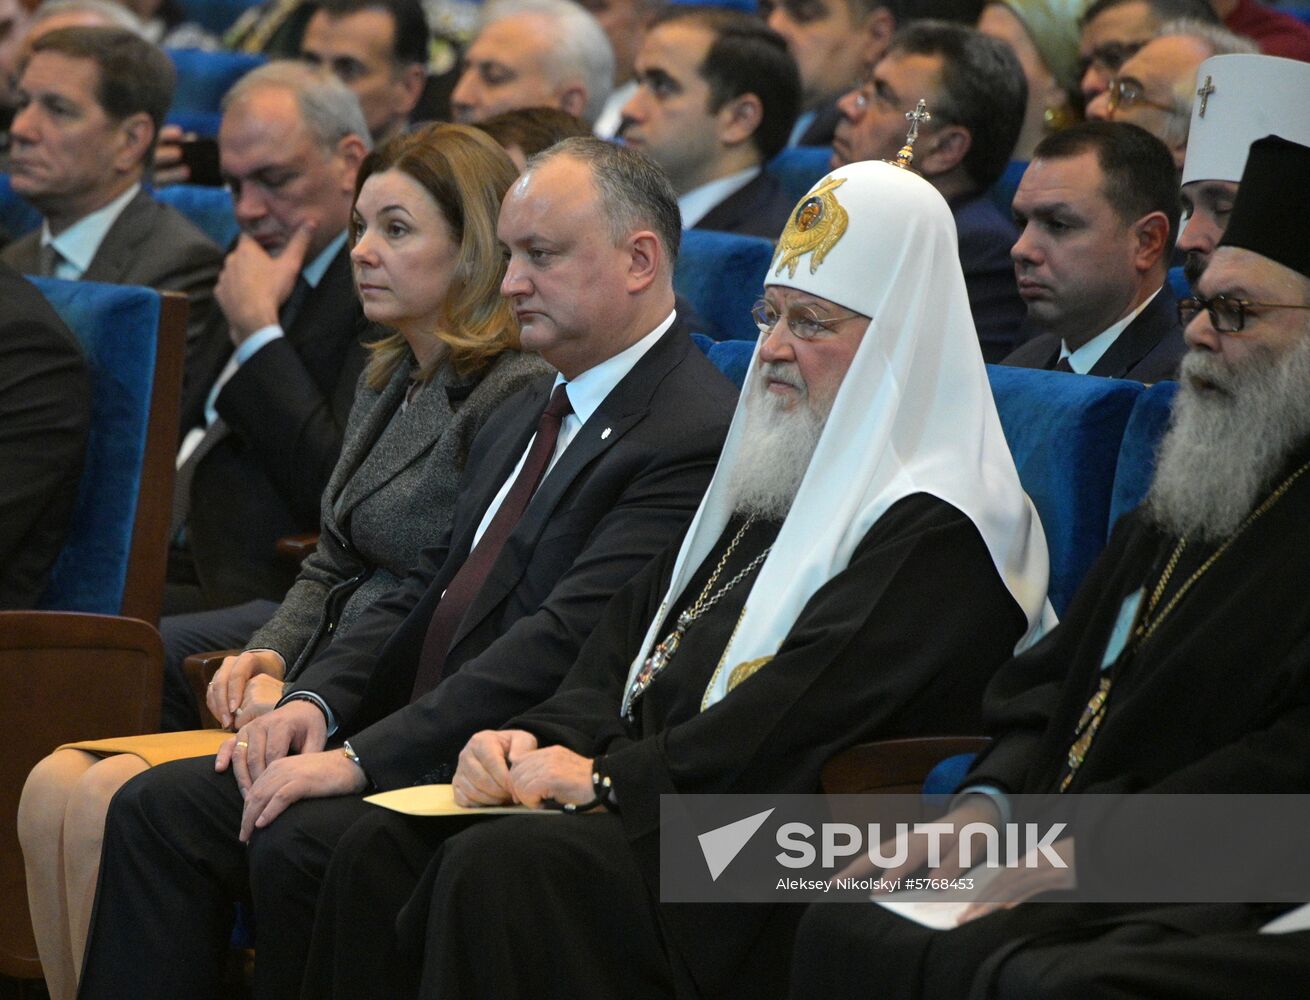 Vladimir Putin attends events marking 10th anniversary of Church Council and Patriarch enthronement